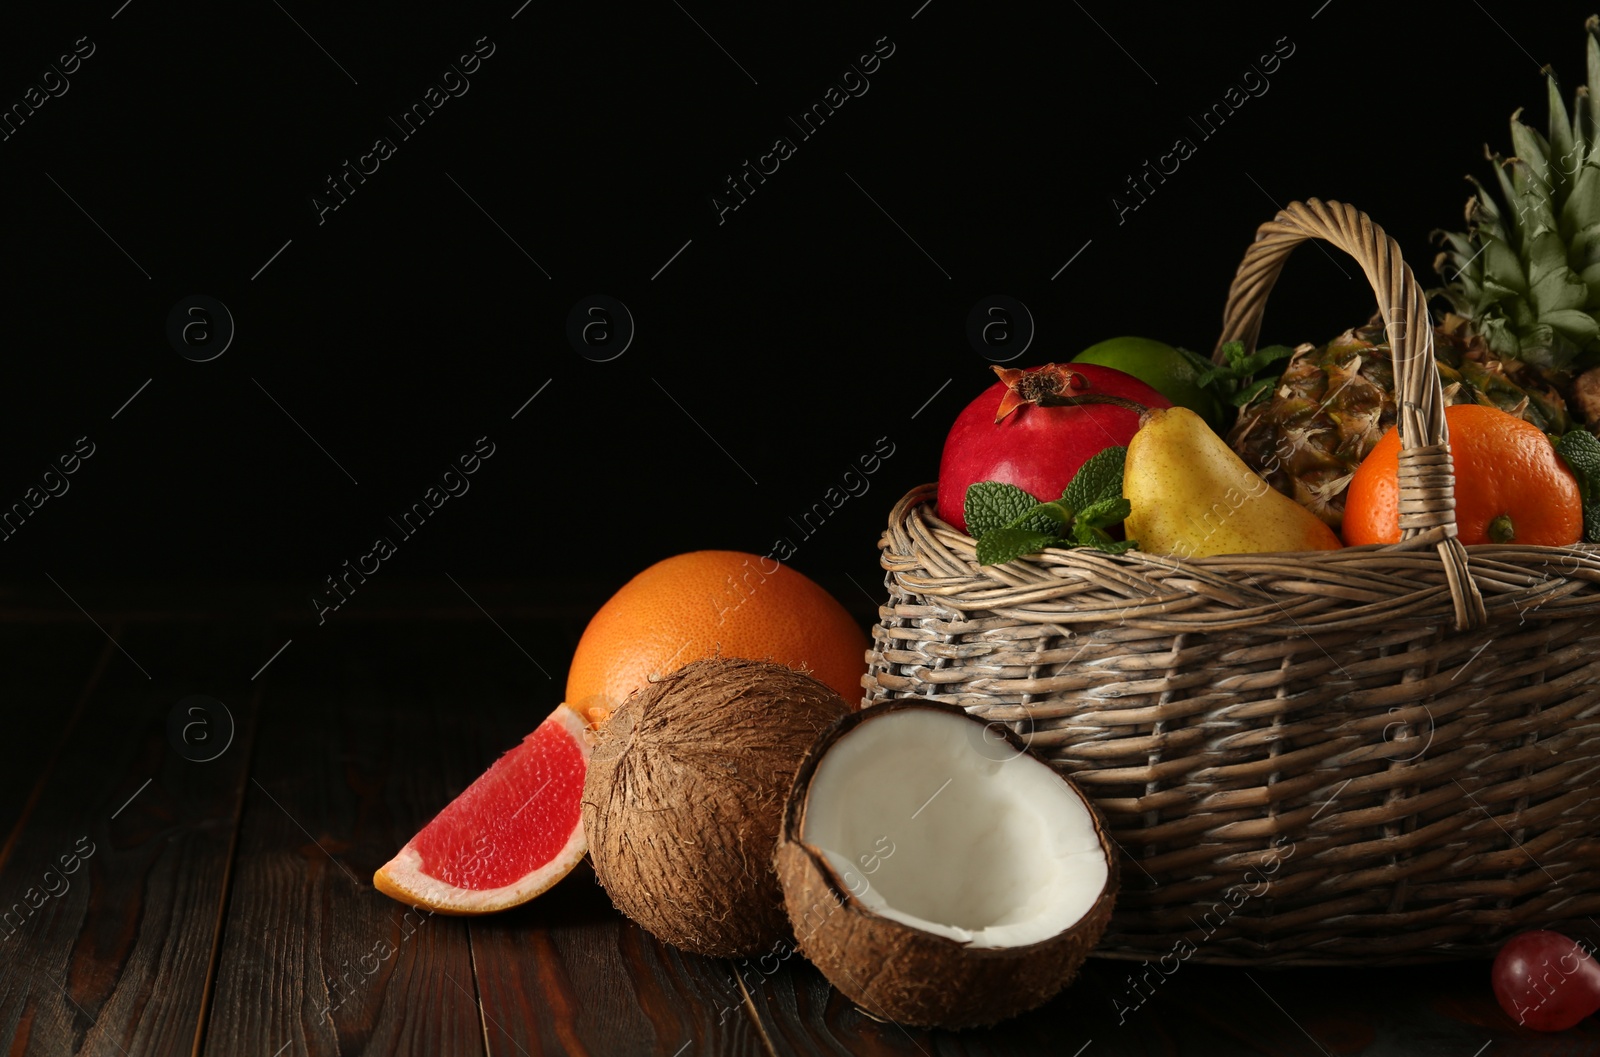 Photo of Wicker basket and different ripe fruits on wooden table against black background. Space for text